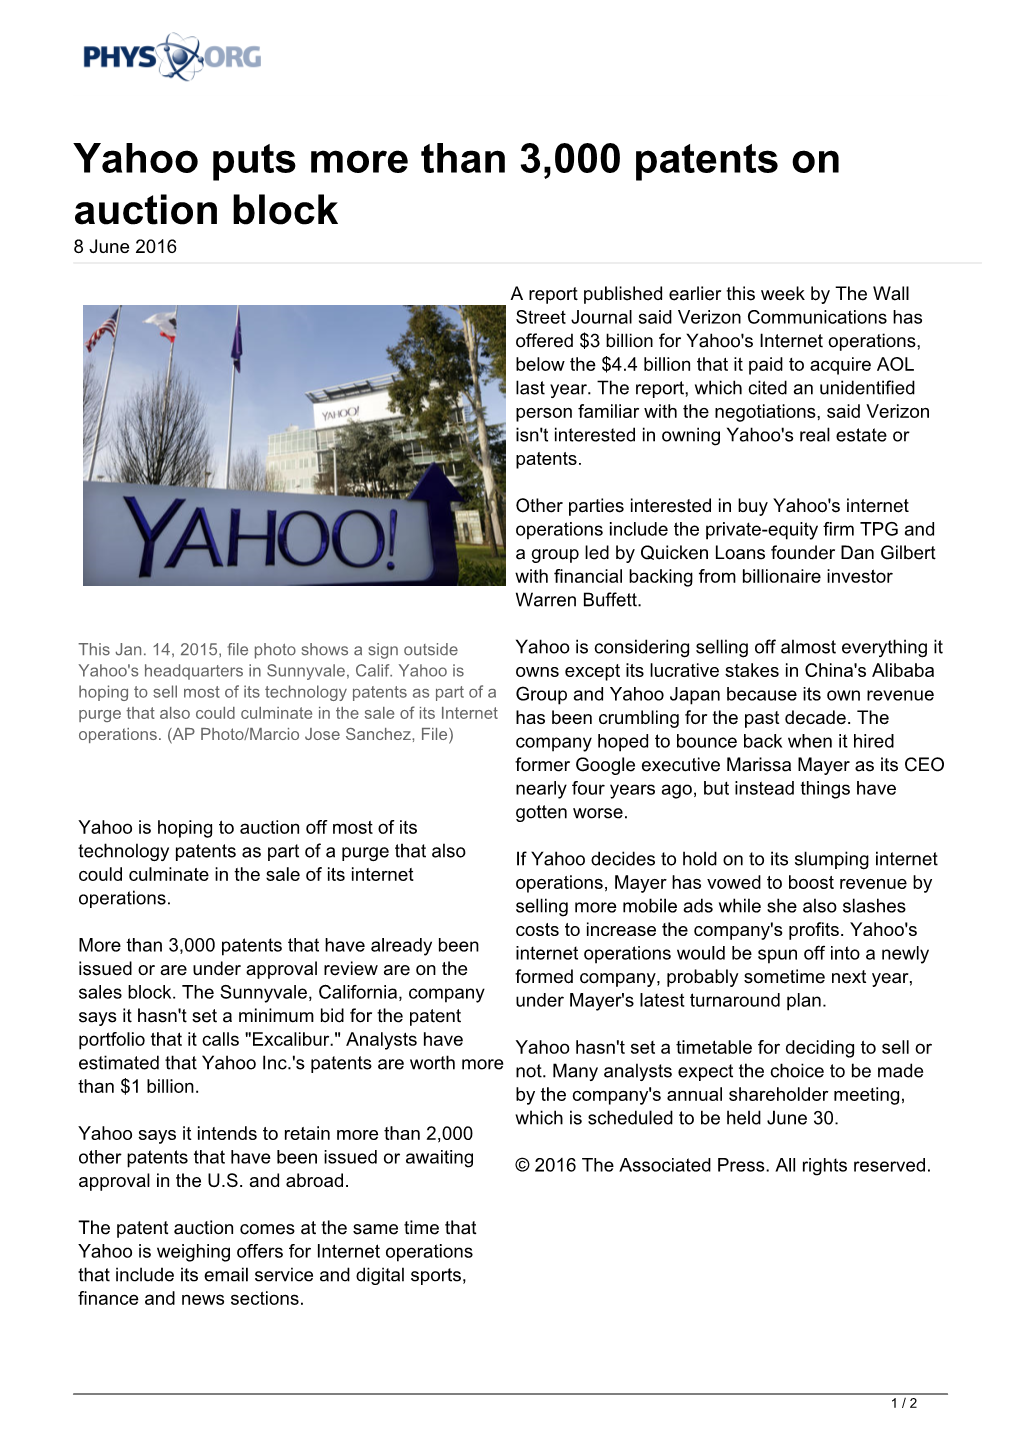 Yahoo Puts More Than 3,000 Patents on Auction Block 8 June 2016